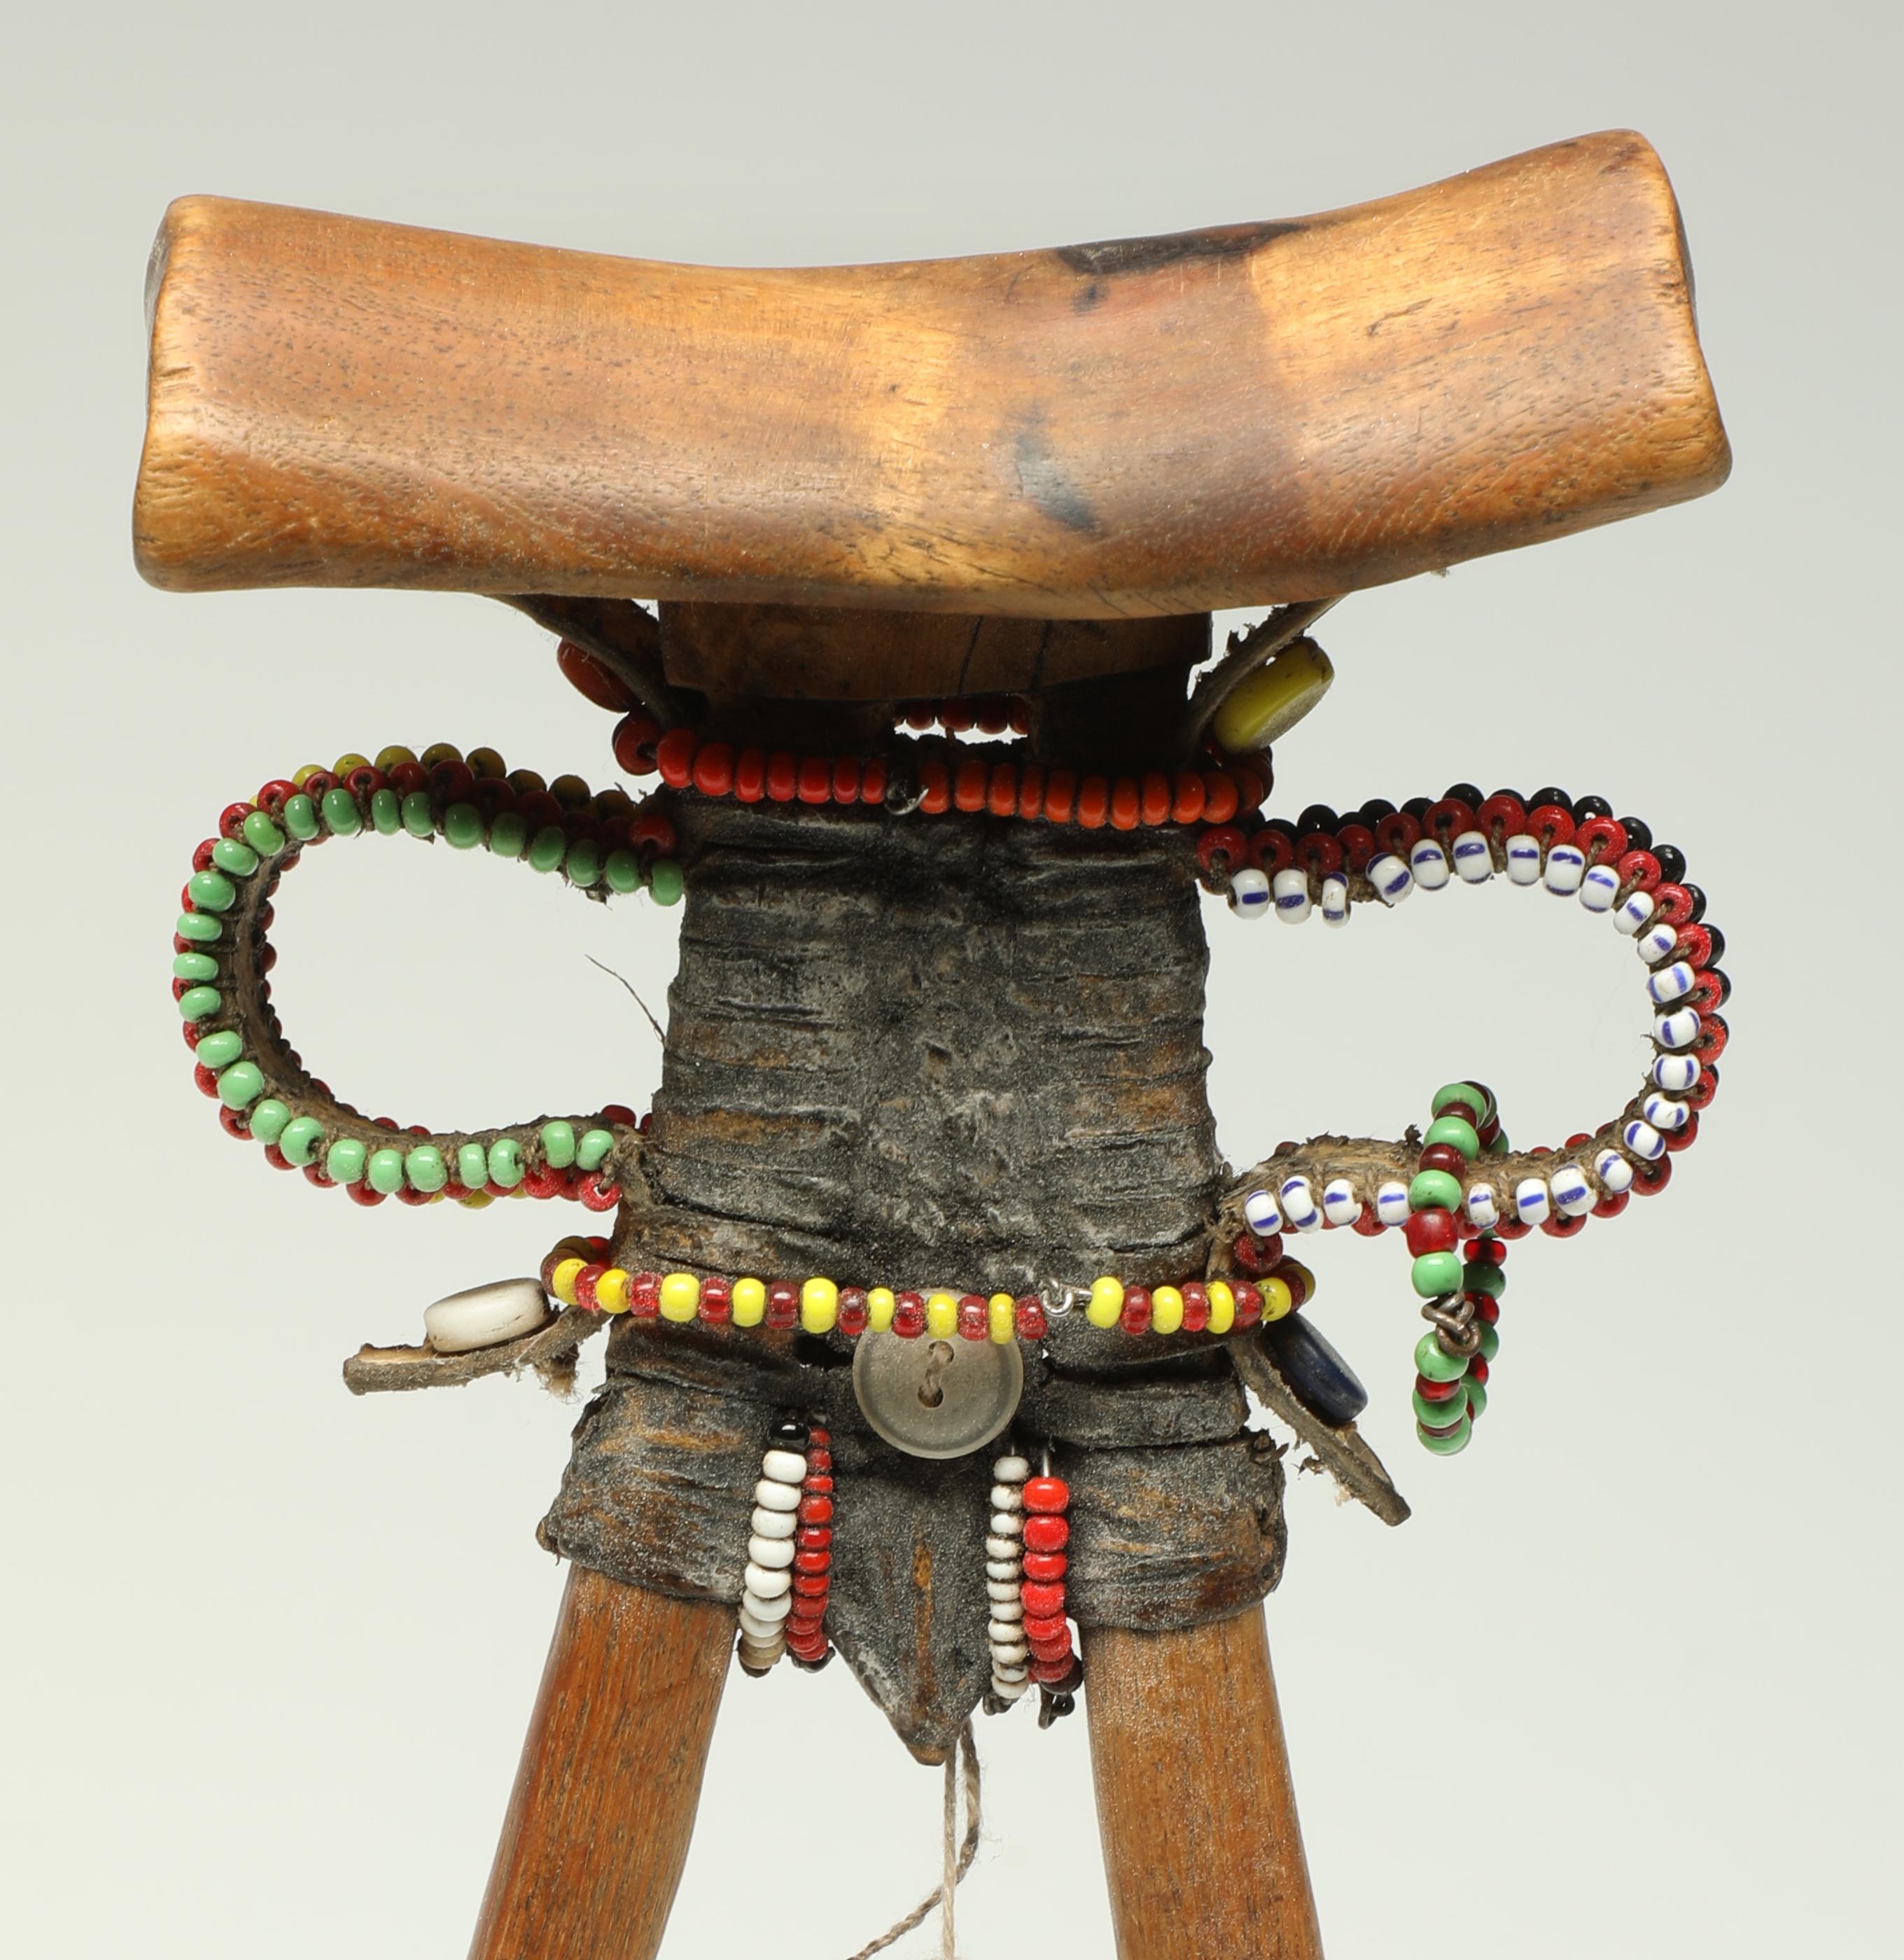 Turkana tribal carved wood headrest, stylized human form, early 20th century, Kenya, African.

Headrest from Kenya with attached leather, beads, buttons and a metal finger knife. Great sculpture from all angles with some sense of human form of